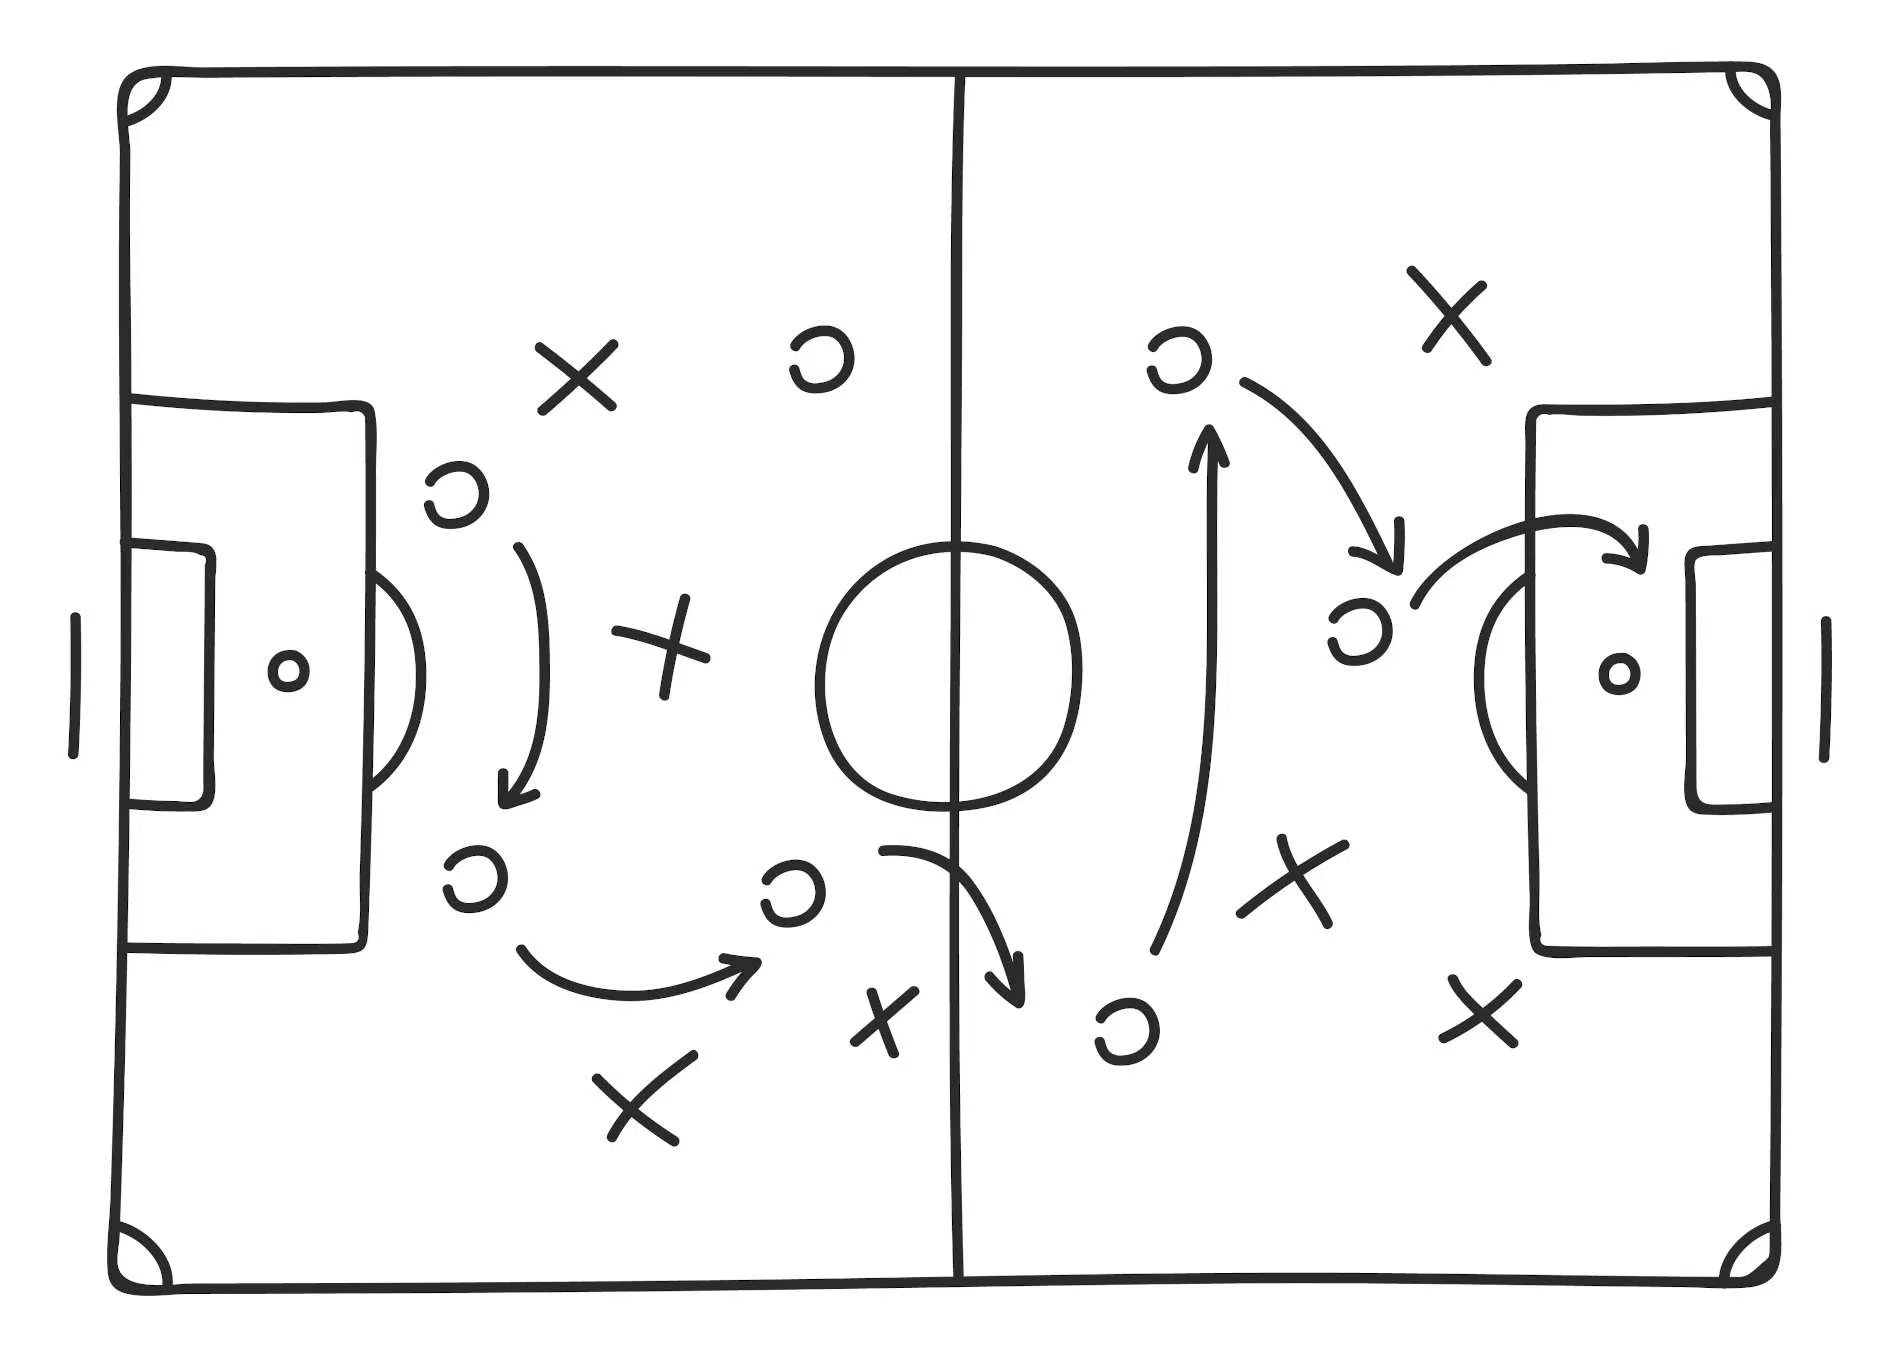 A diagram of a soccer field with arrows pointing in different directions.